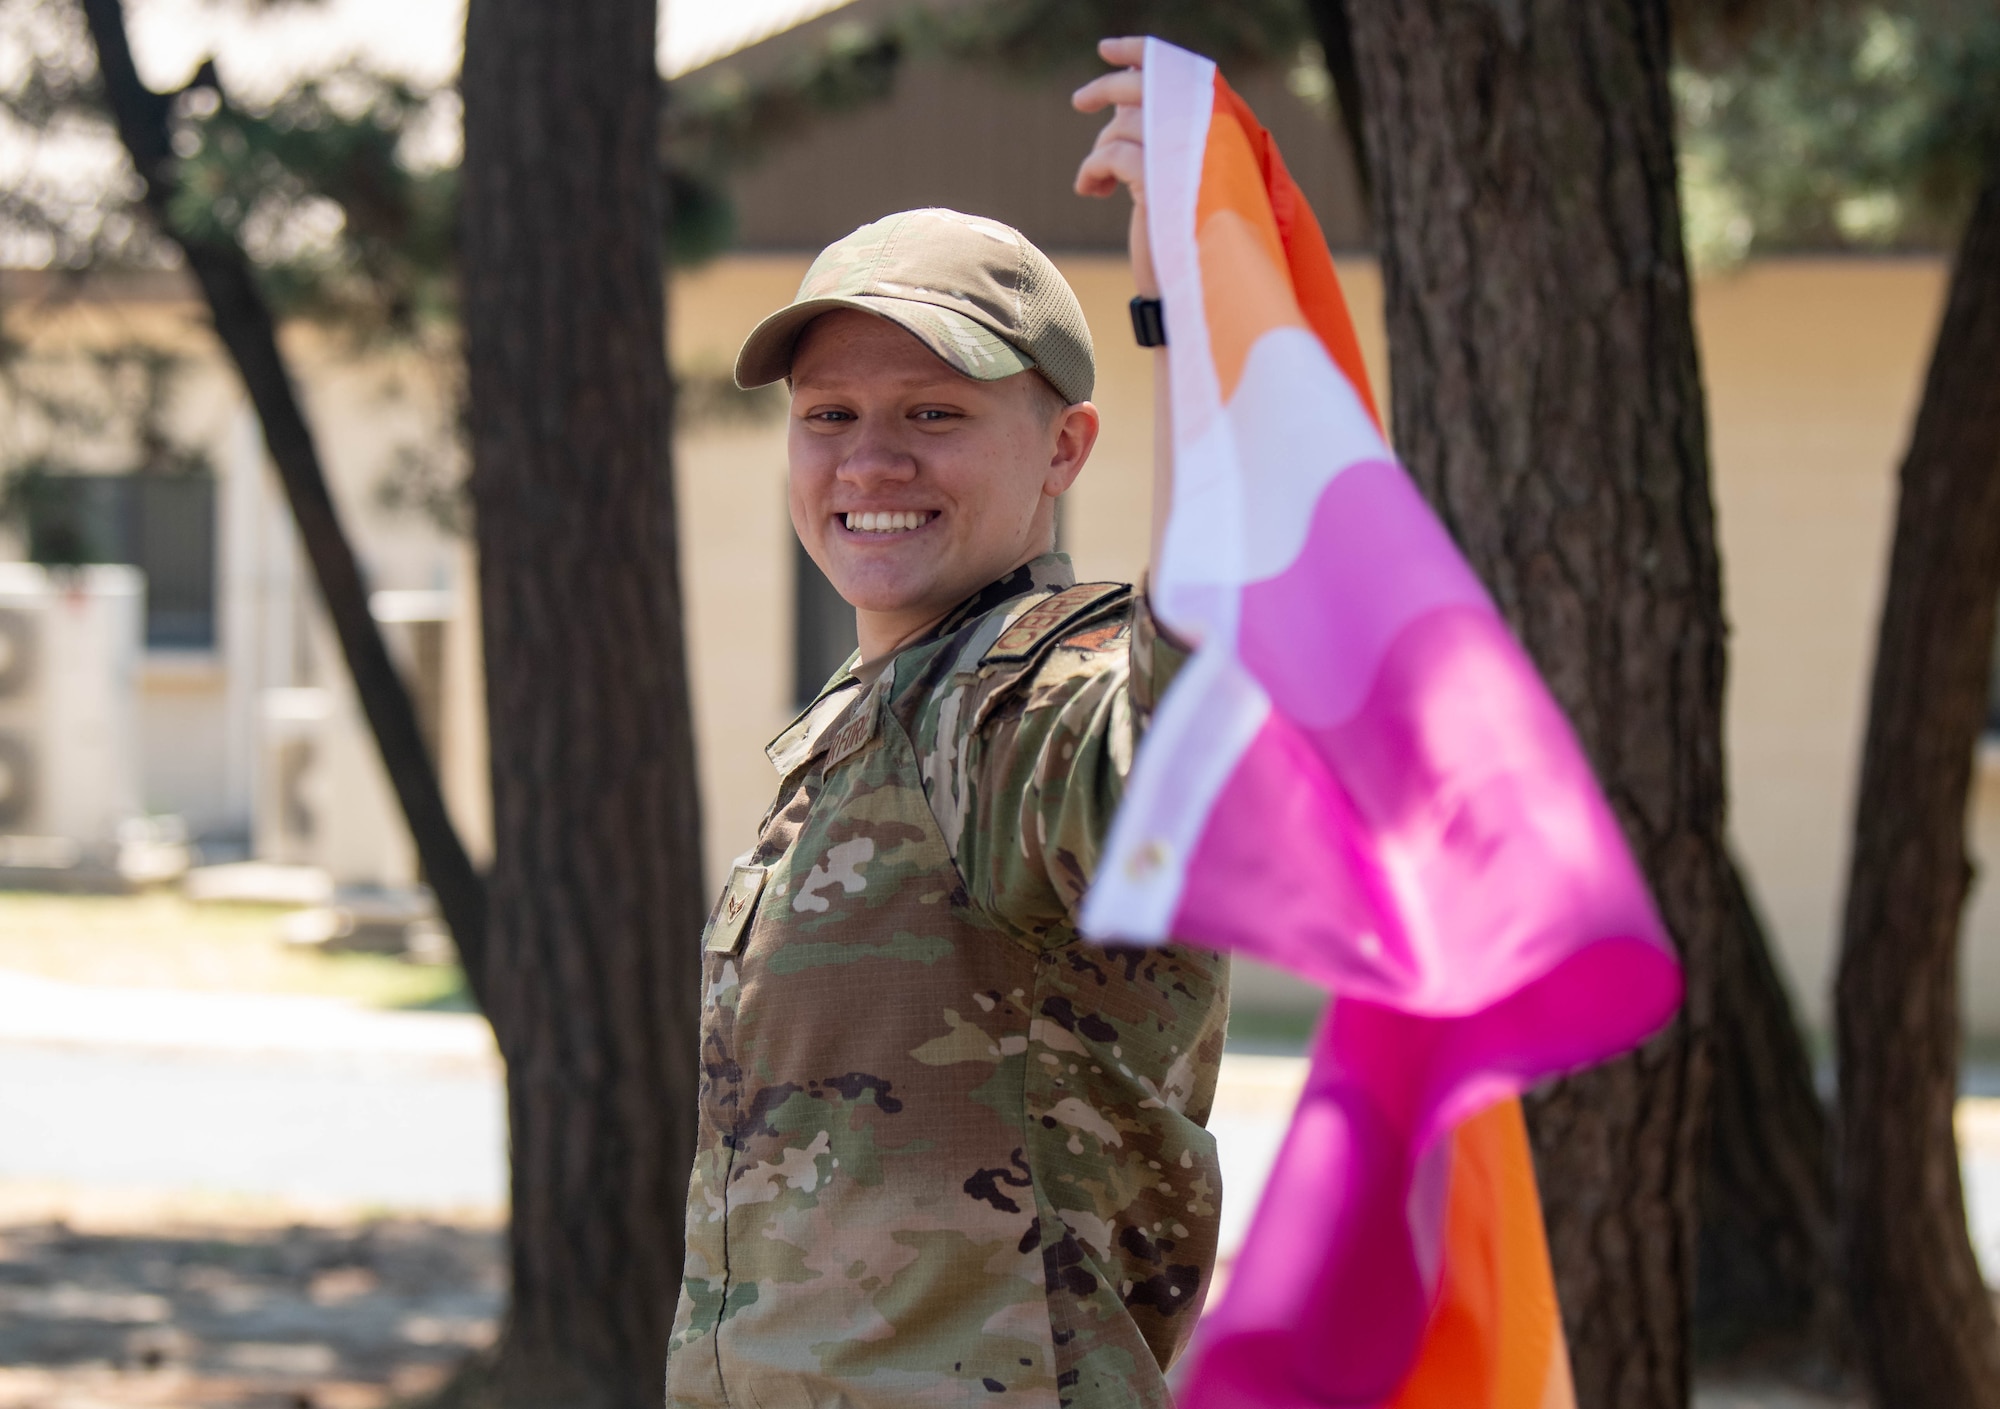 A military member poses with the lesbian pride flag.